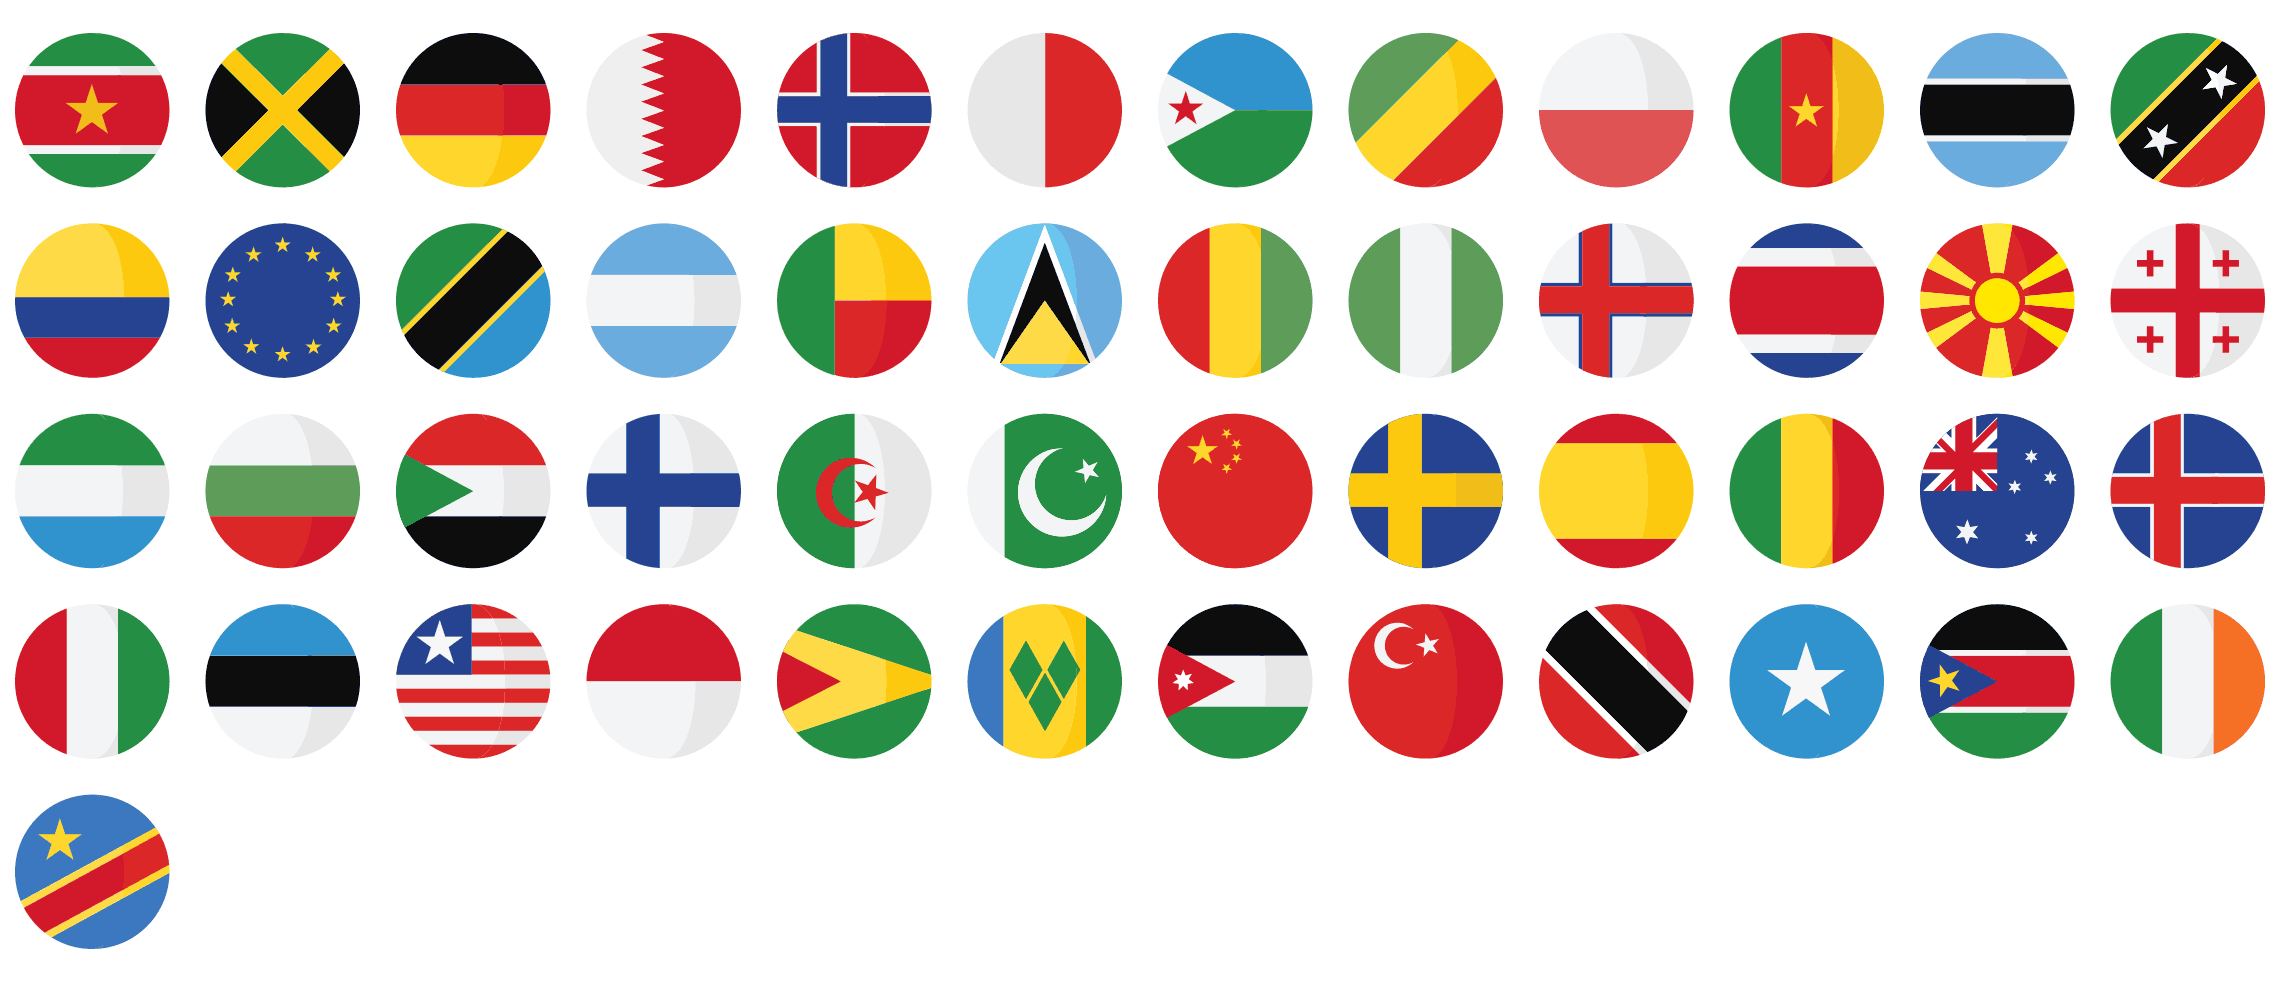 flags-2-flat-icons-vol-1-preview